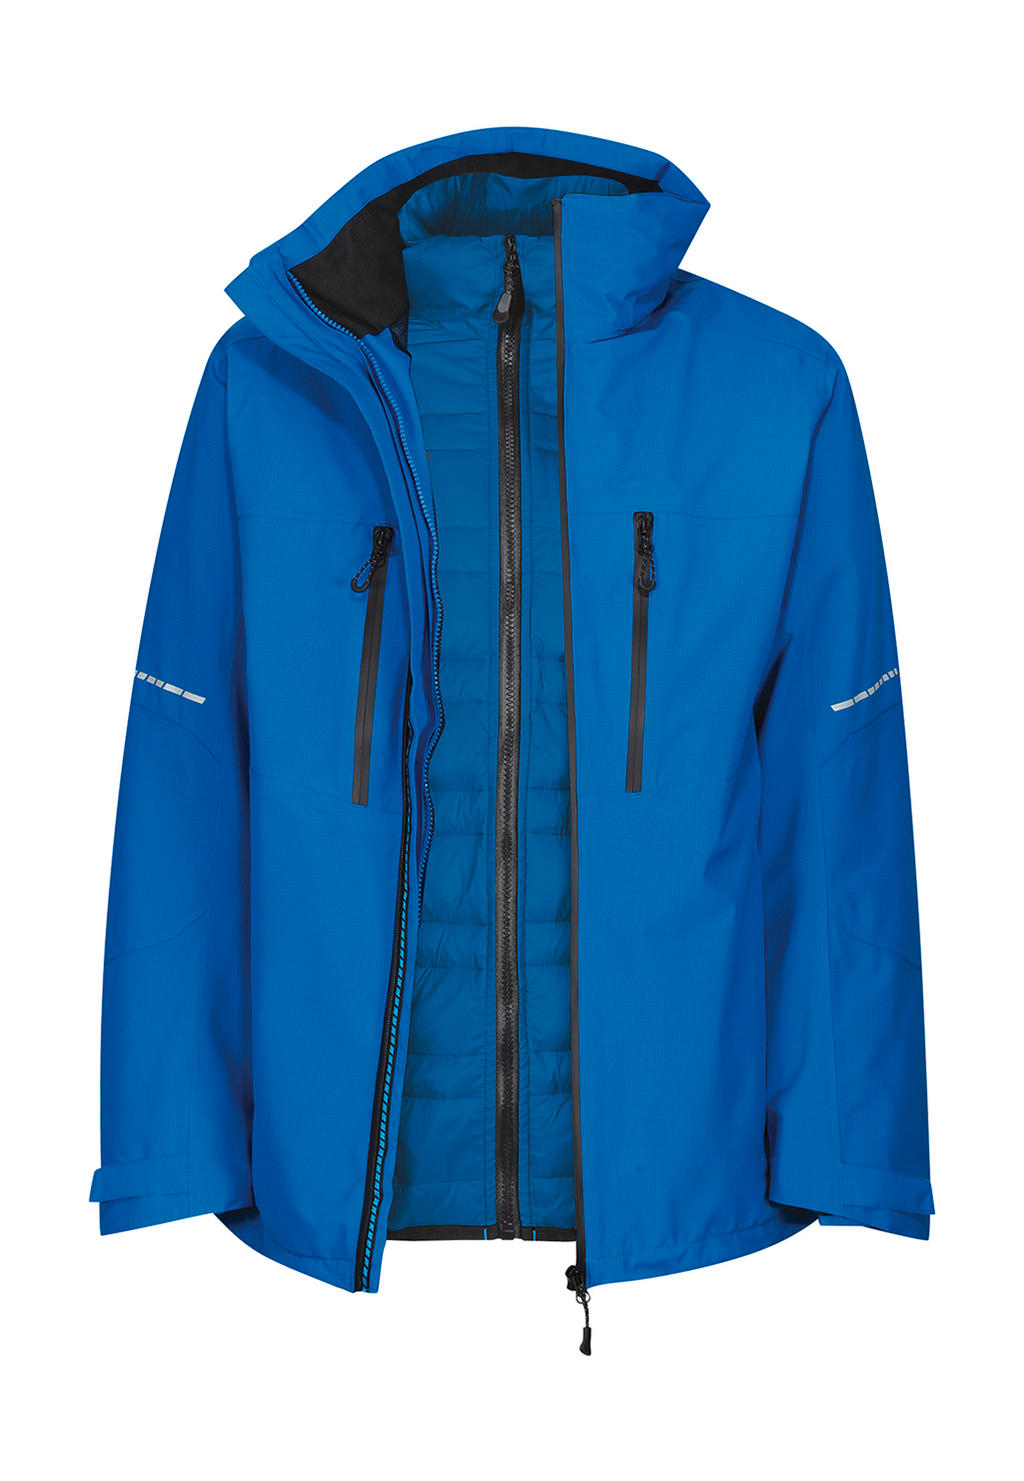  X-Pro Evader III 3 in1 Jacket in Farbe Oxford Blue/Black